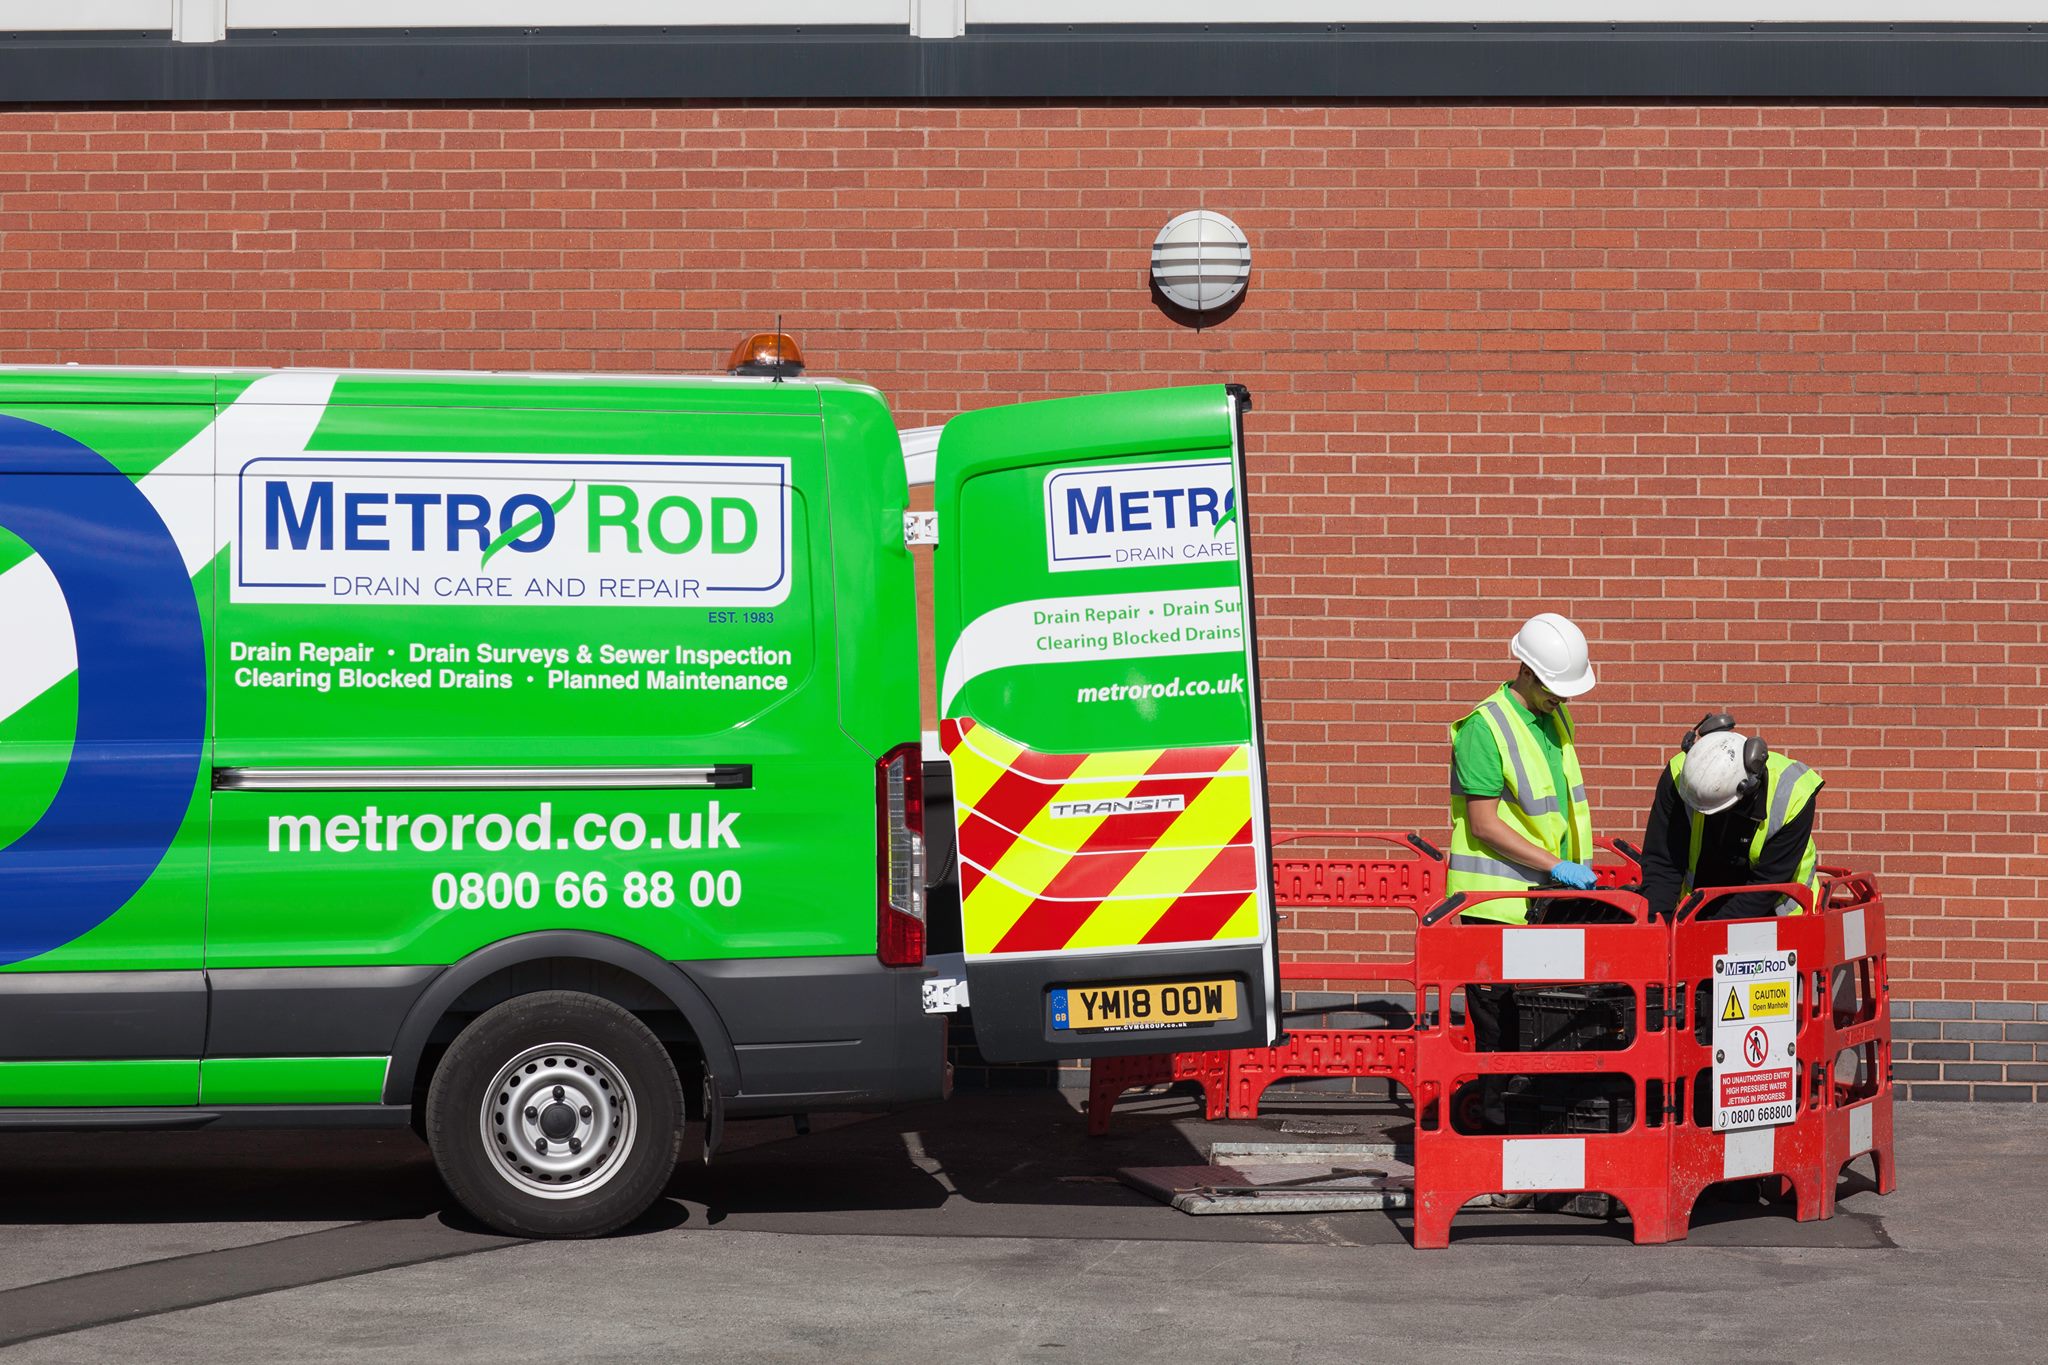 Frequently Asked Questions – Metro Rod Cumbria